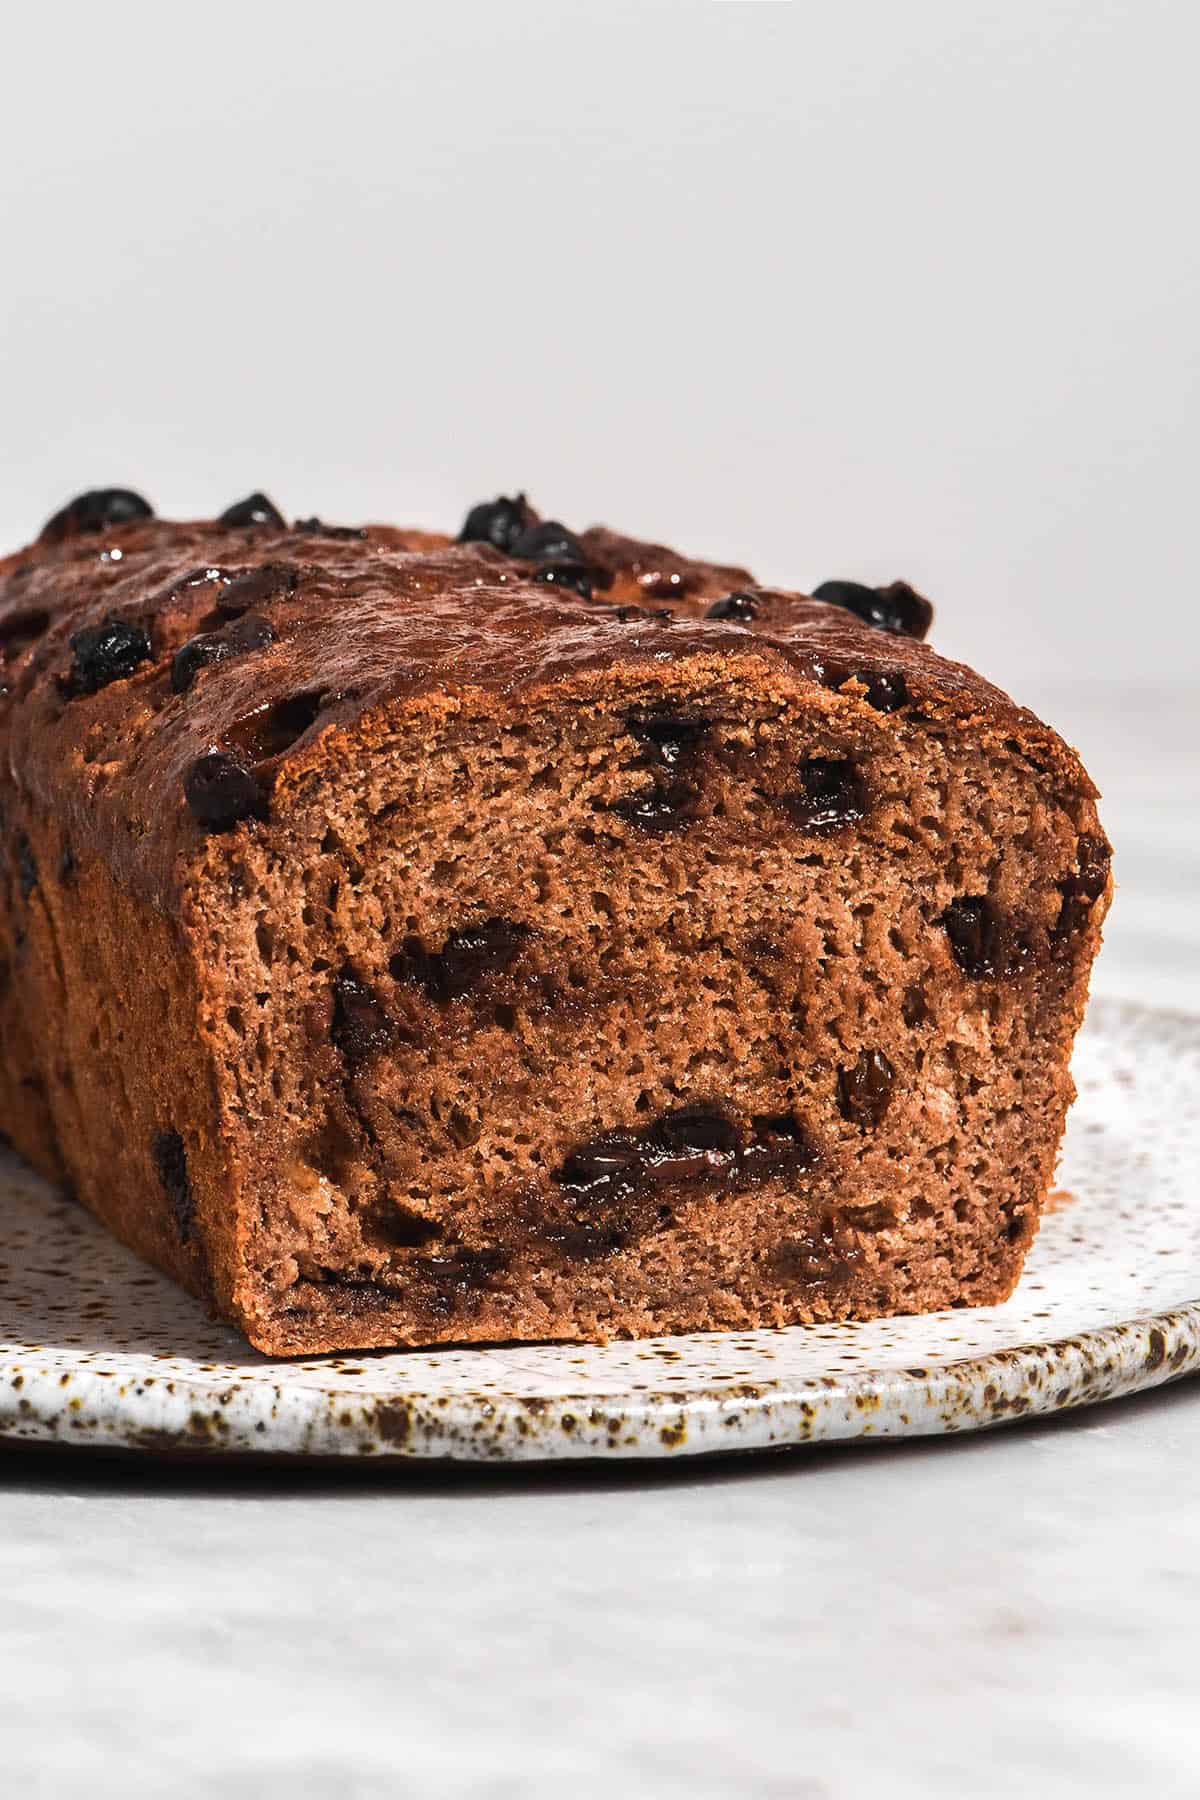 A brightly lit side on view of a gluten free hot cross bun loaf swirled with cinnamon sugar and studded with dark chocolate chips and raisins. The loaf has been sliced, revealing the crumb and melty chocolate inside. It sits on a white speckled ceramic plate against a white backdrop.